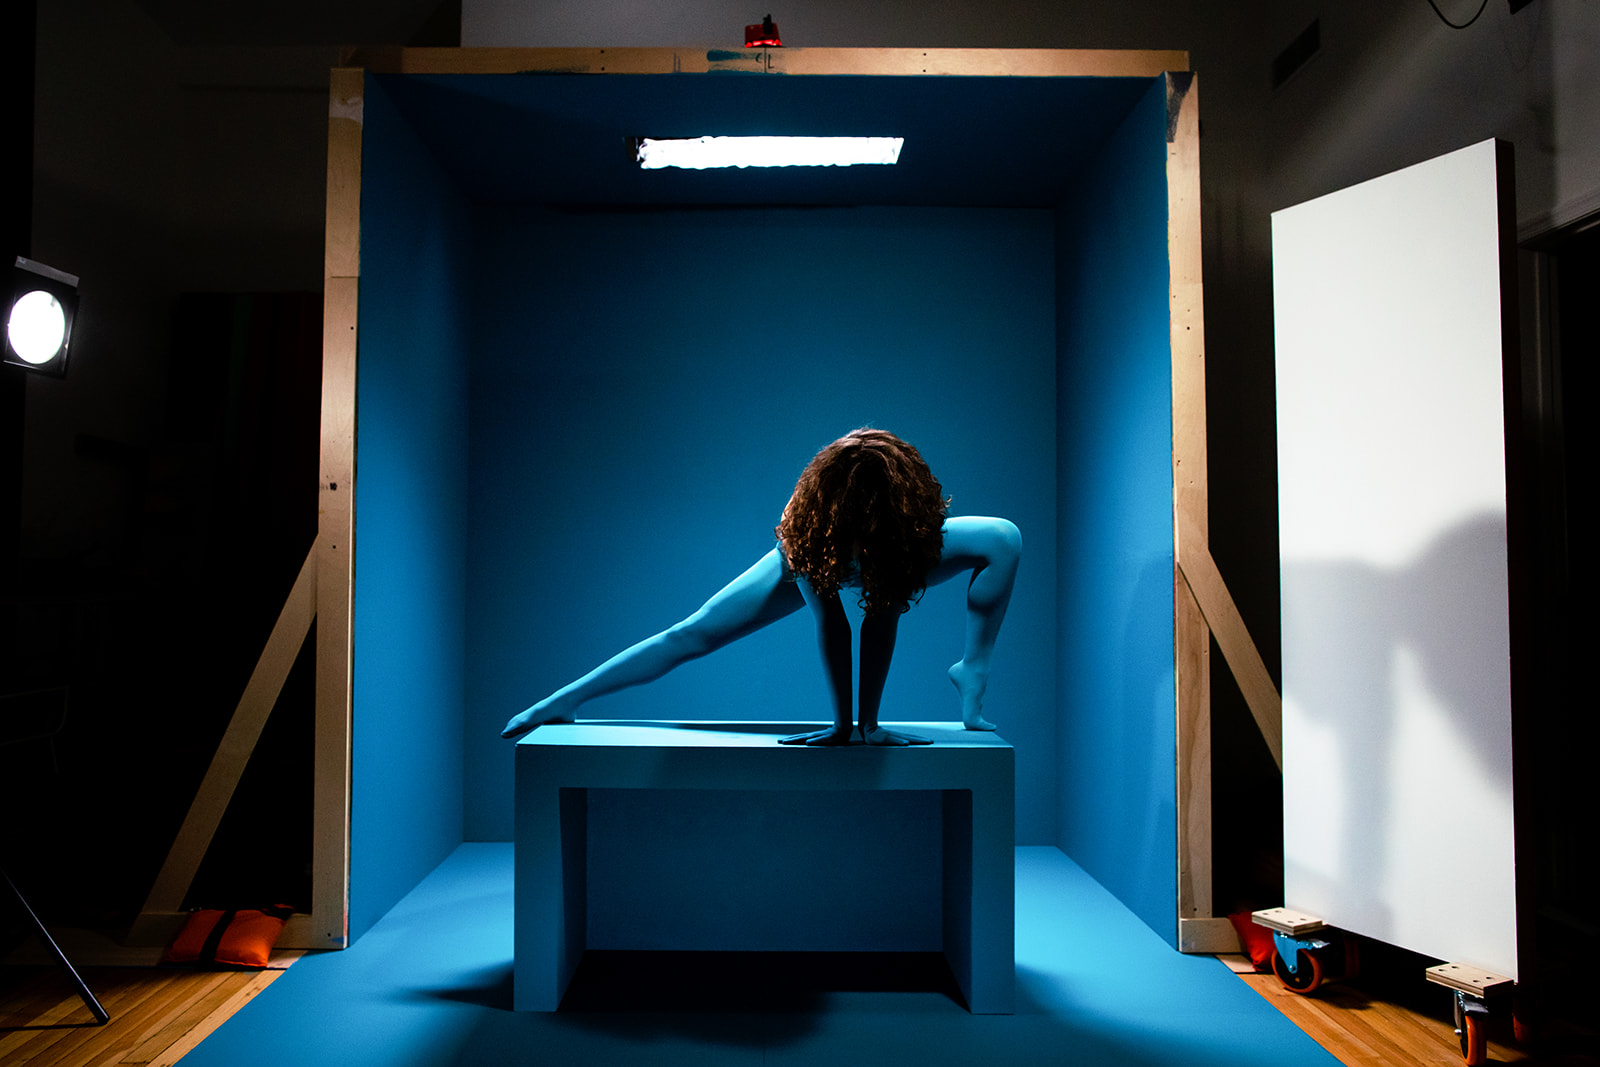 Teal Tights Body Sculptures in a Teal Cube Conceptual Photos - Image Property of www.j-dphoto.com